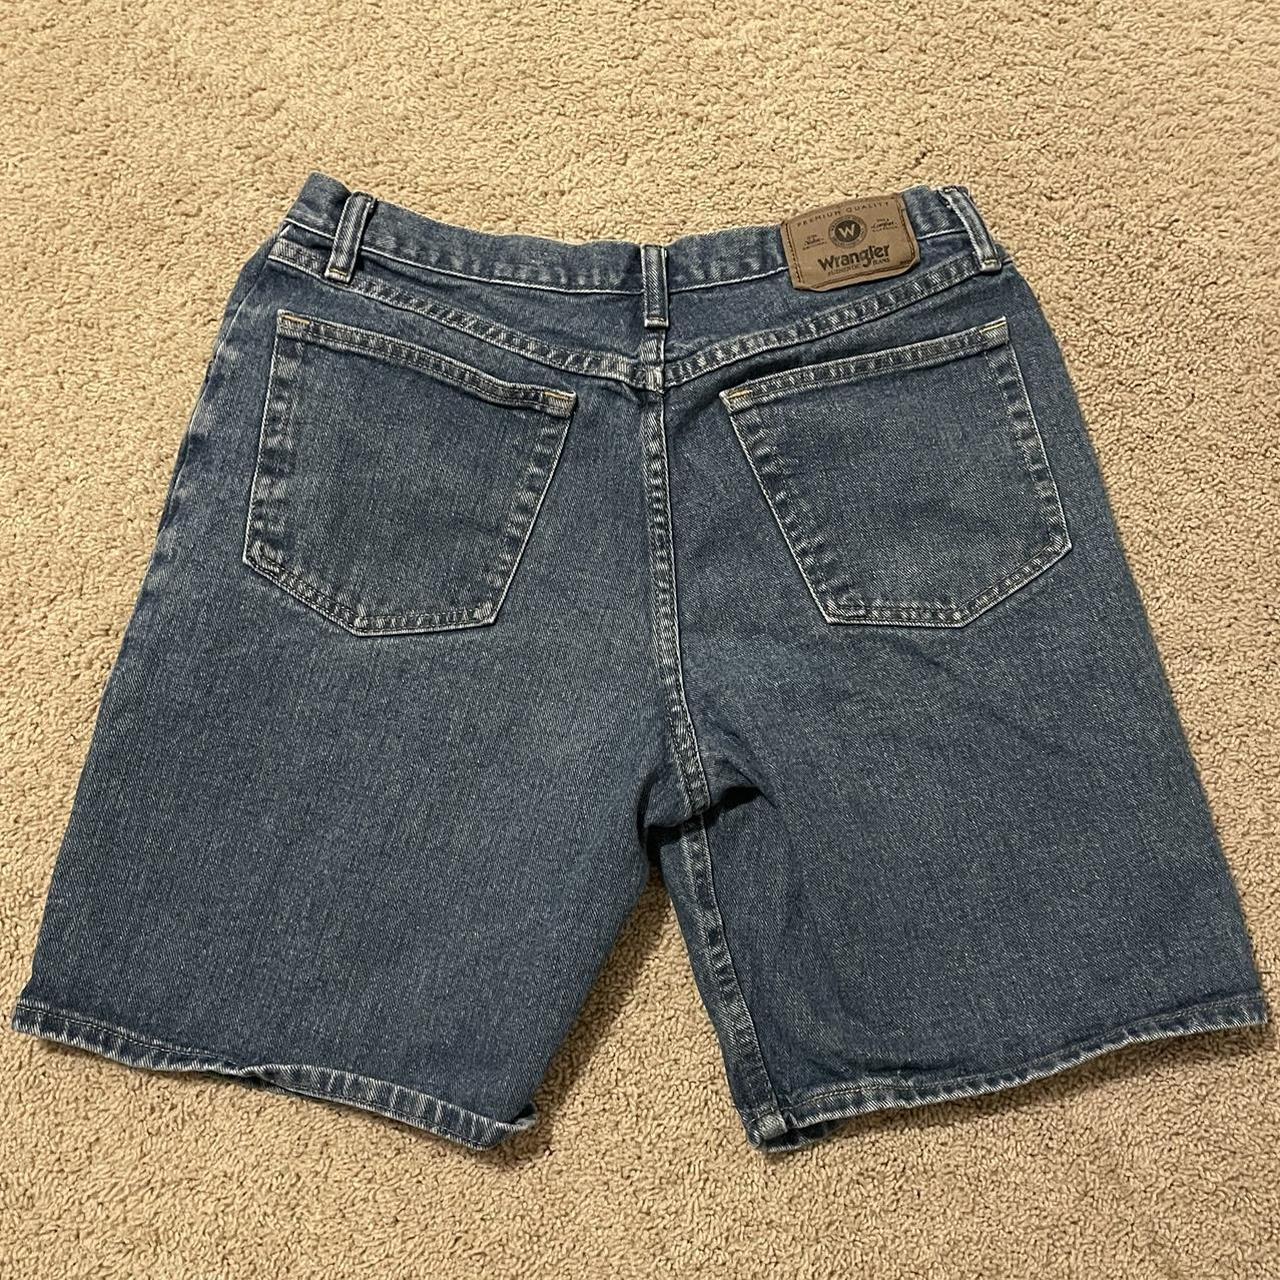 wrangler relaxed fit jean shorts size 33. great... - Depop